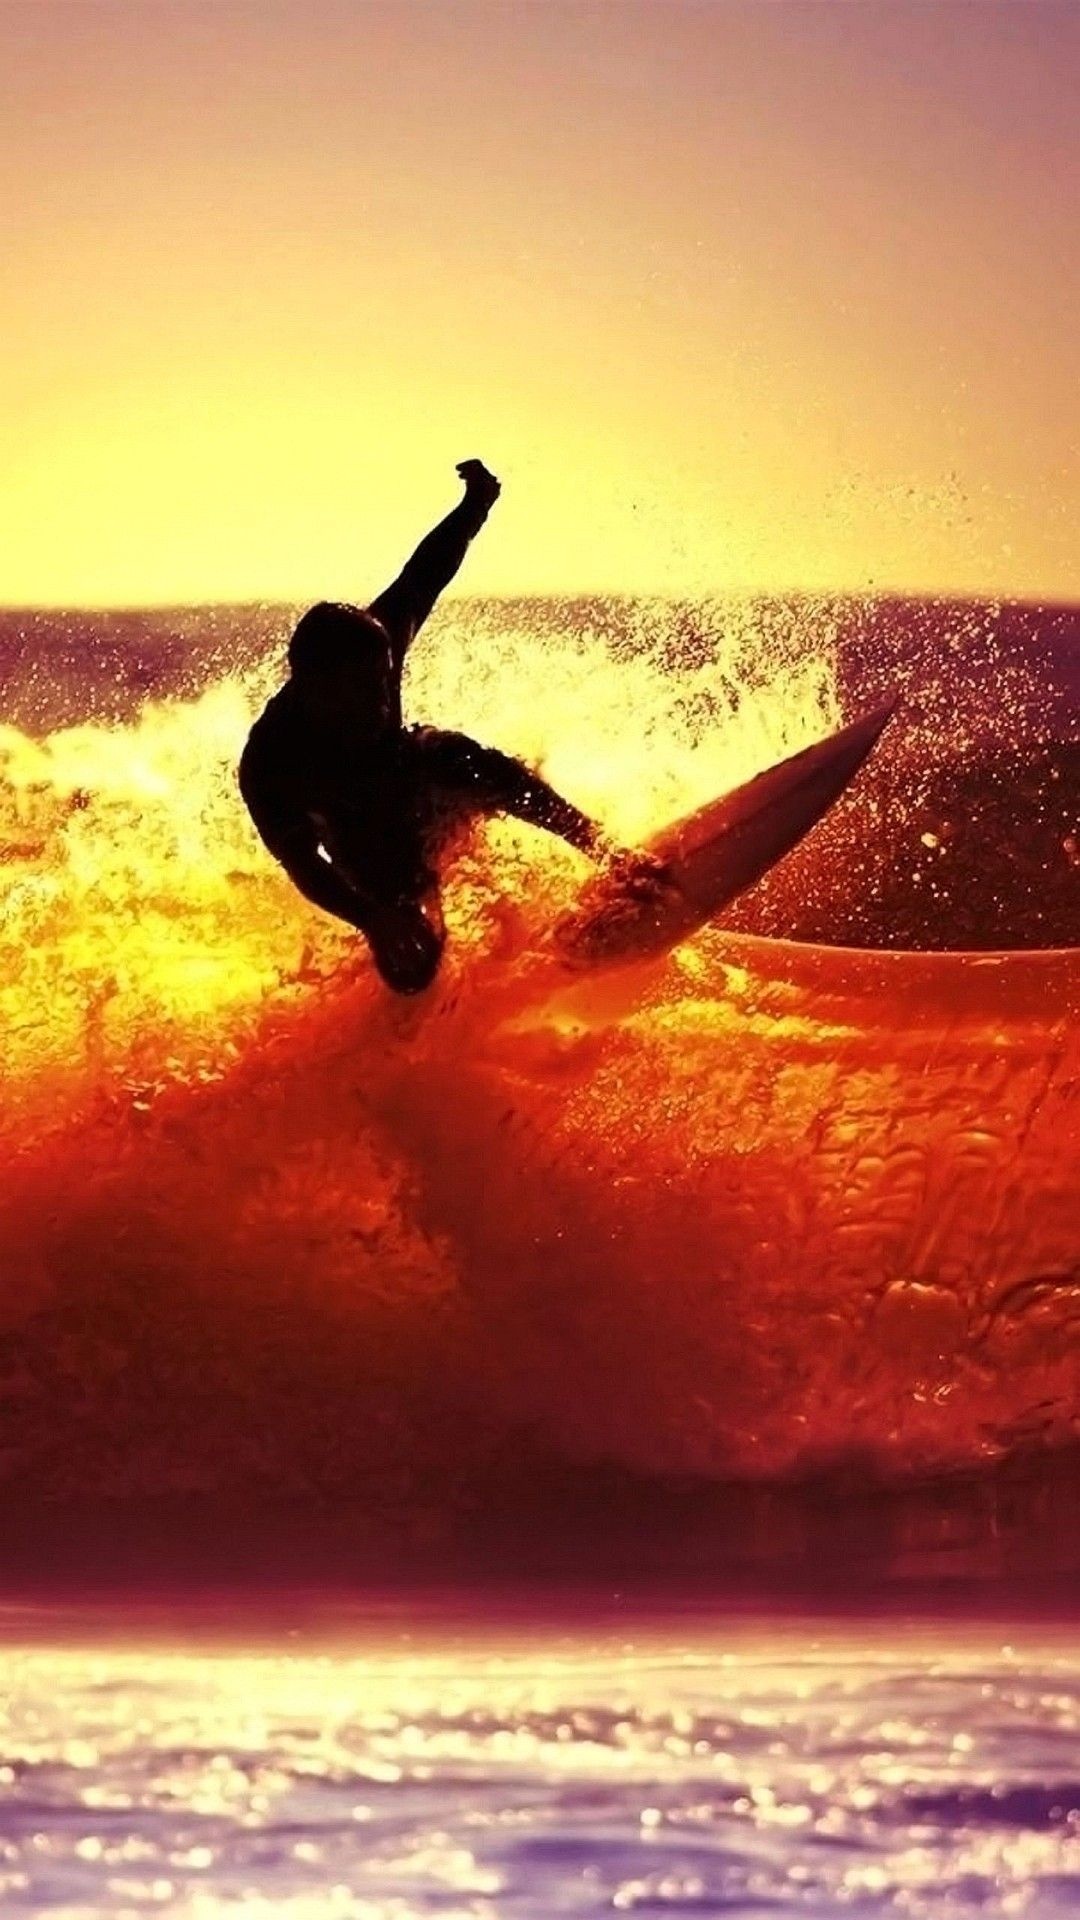 Artistic surfography, iPhone exclusives, Surfer's delight, Mobile style, 1080x1920 Full HD Phone